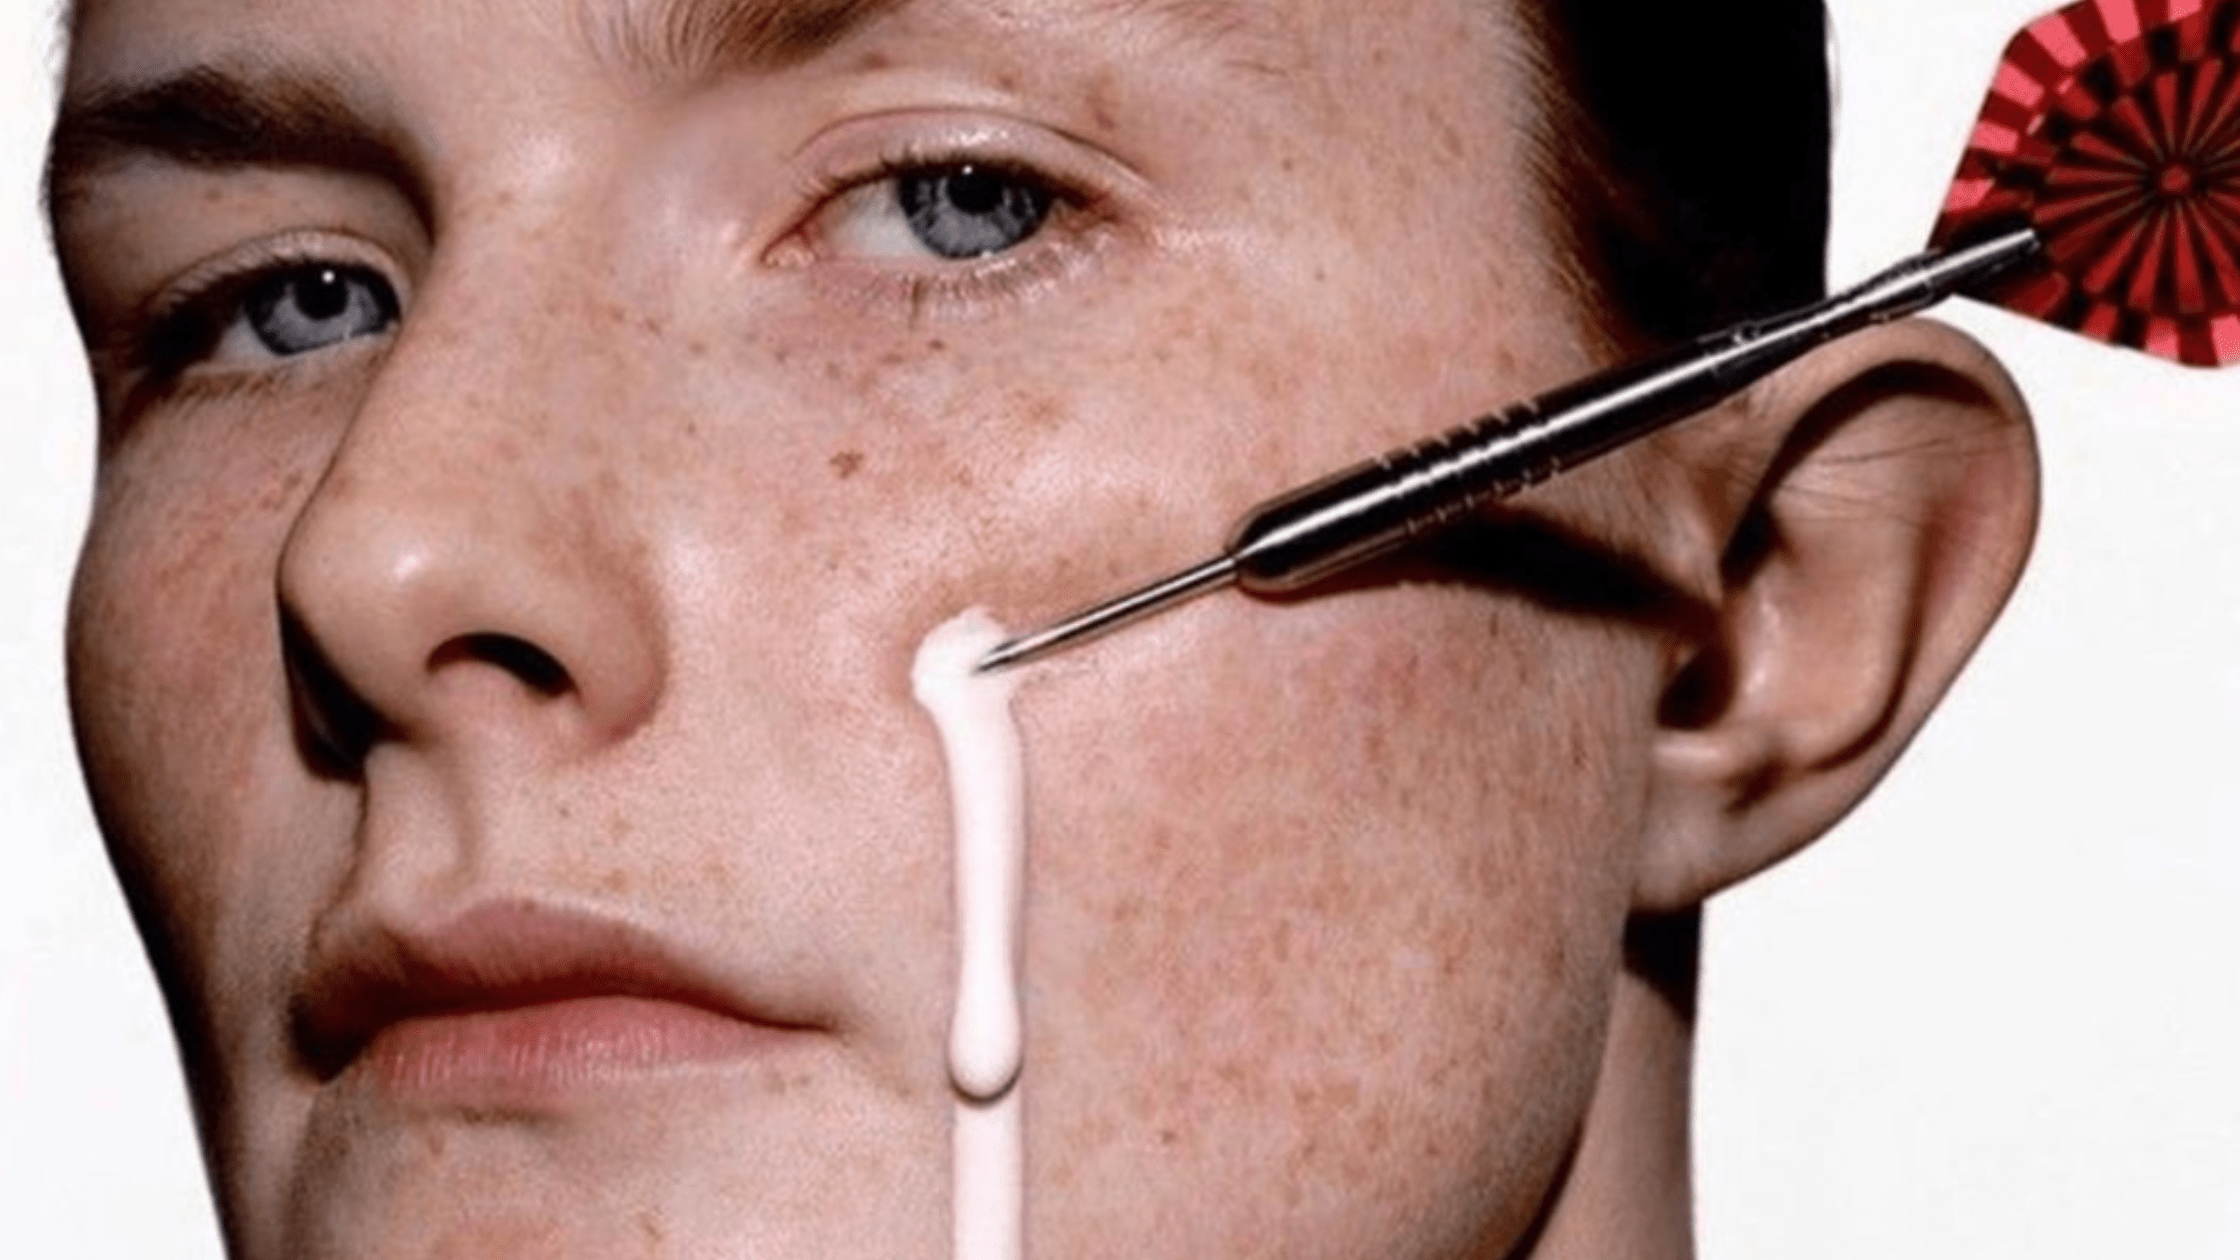 Restrictions on permanent make-up